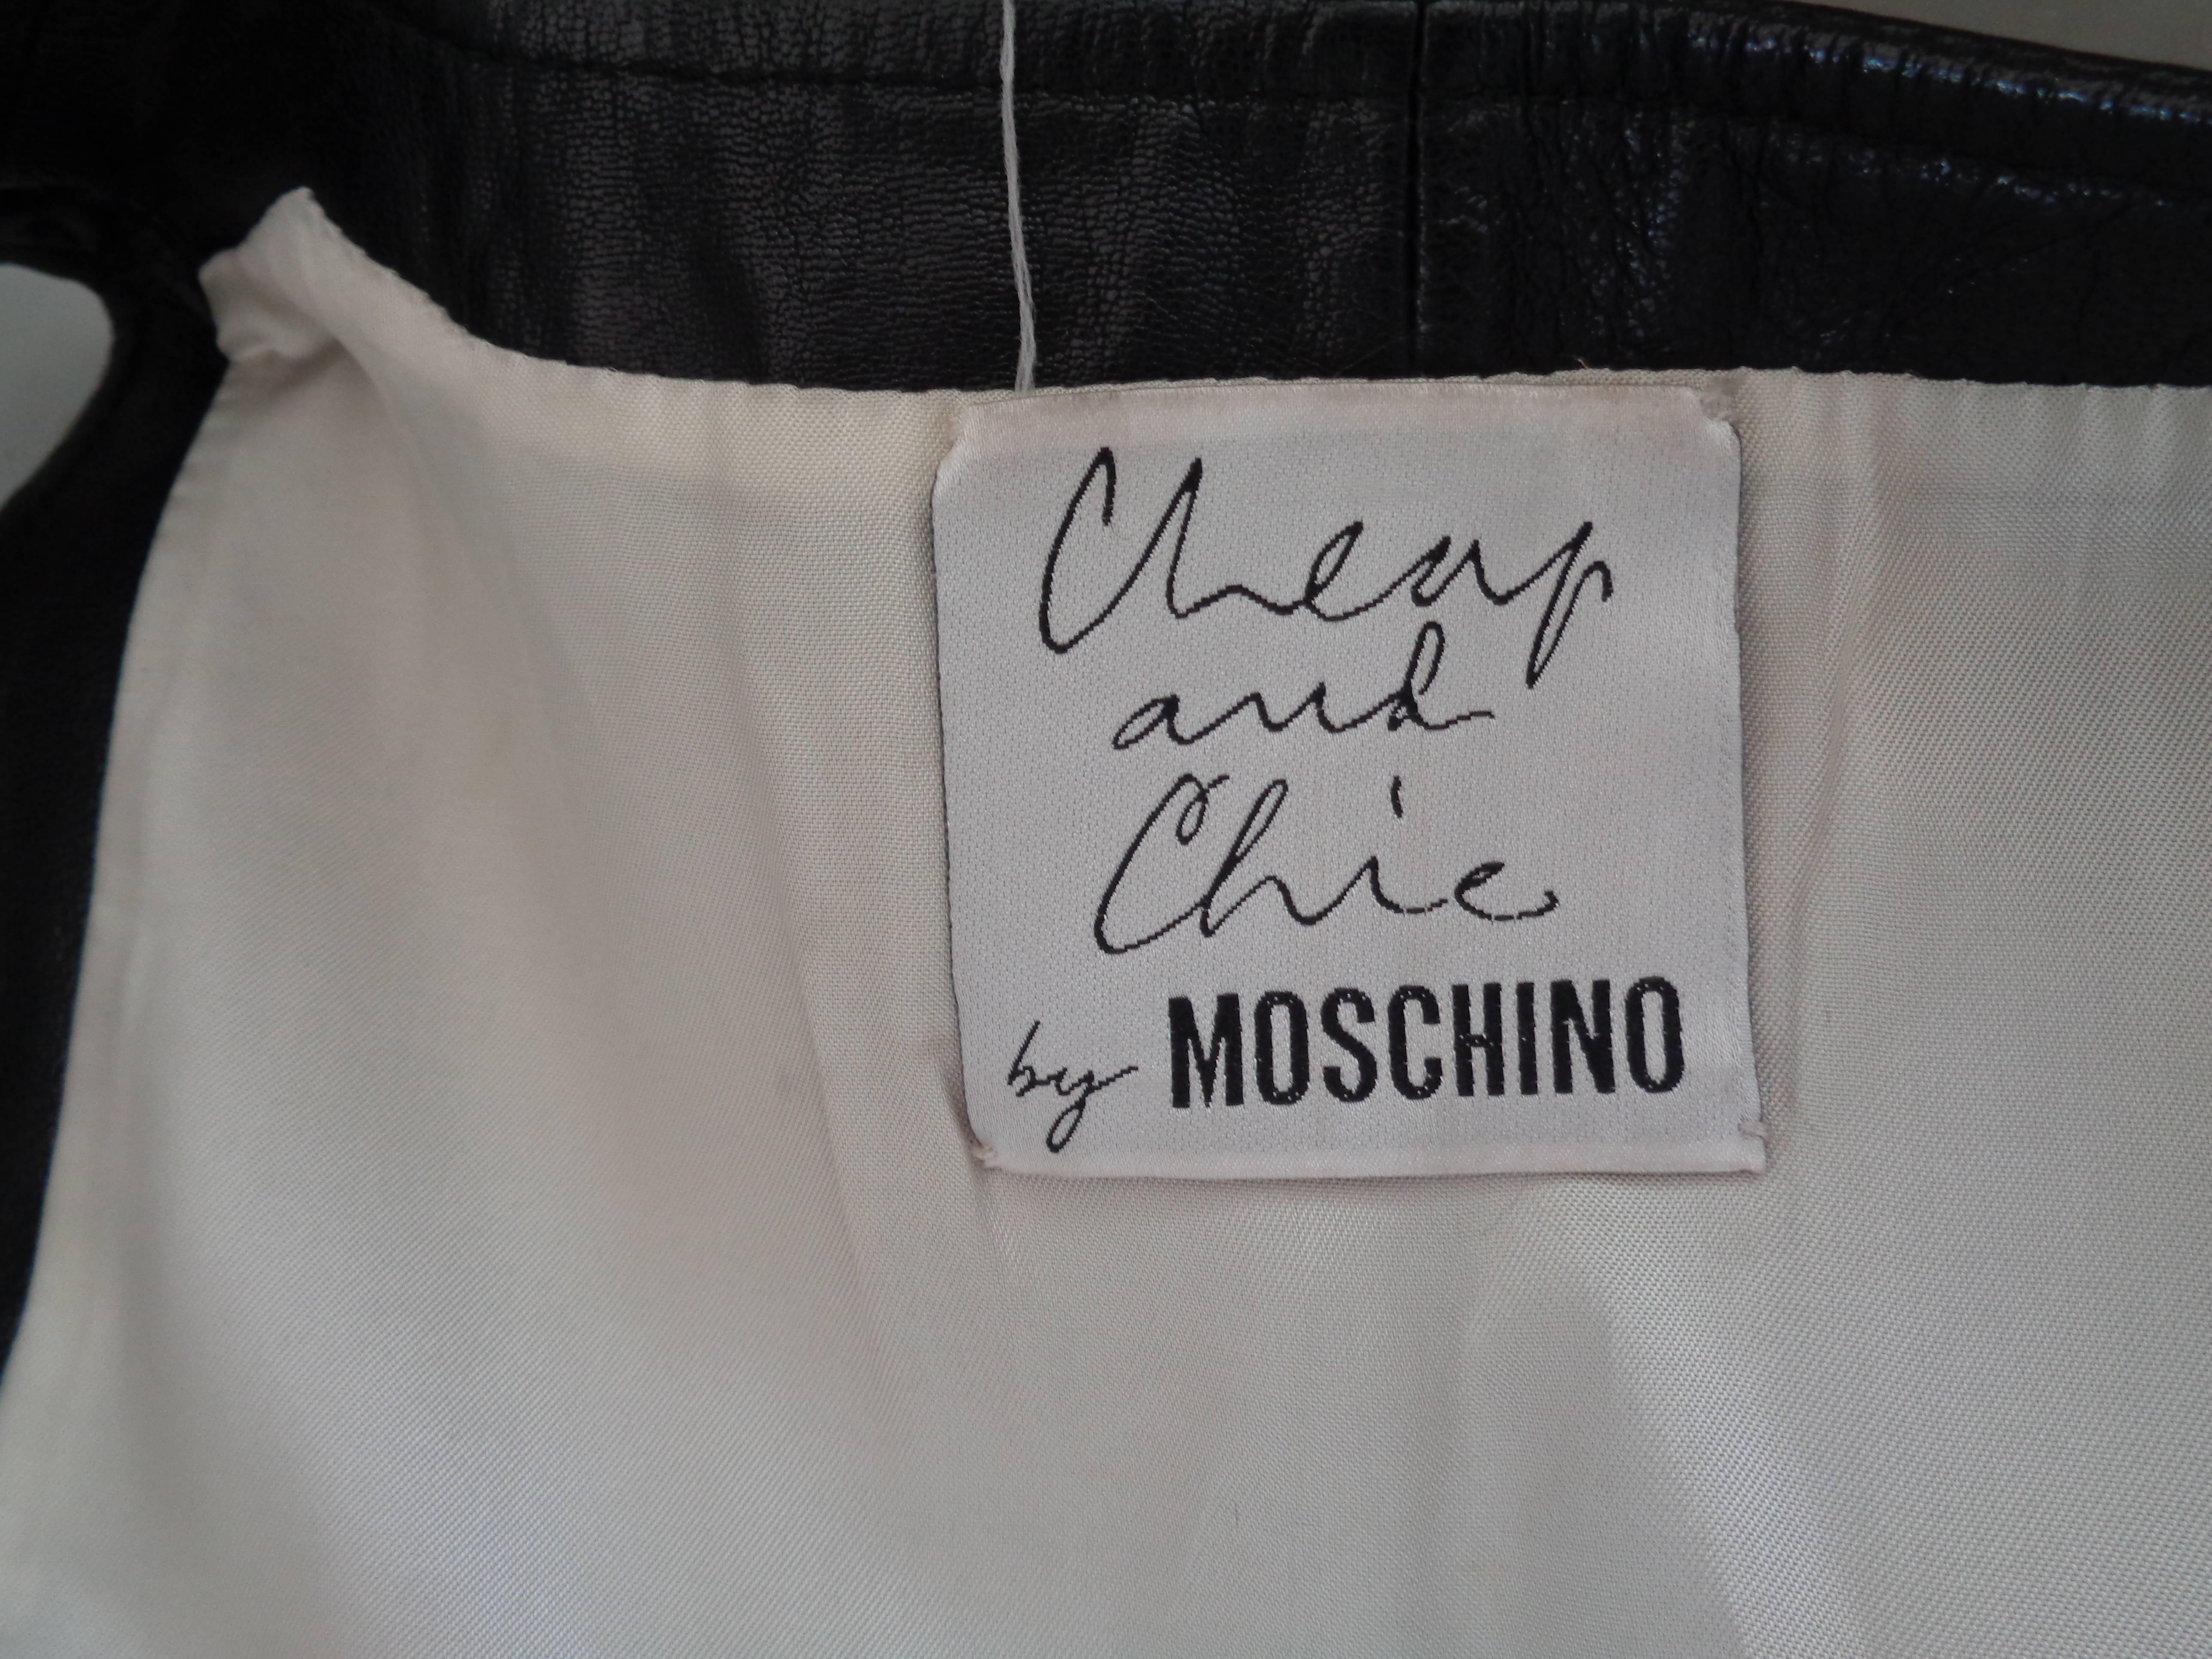 Women's or Men's Moschino Cheap & Chic Black Leather Dress For Sale